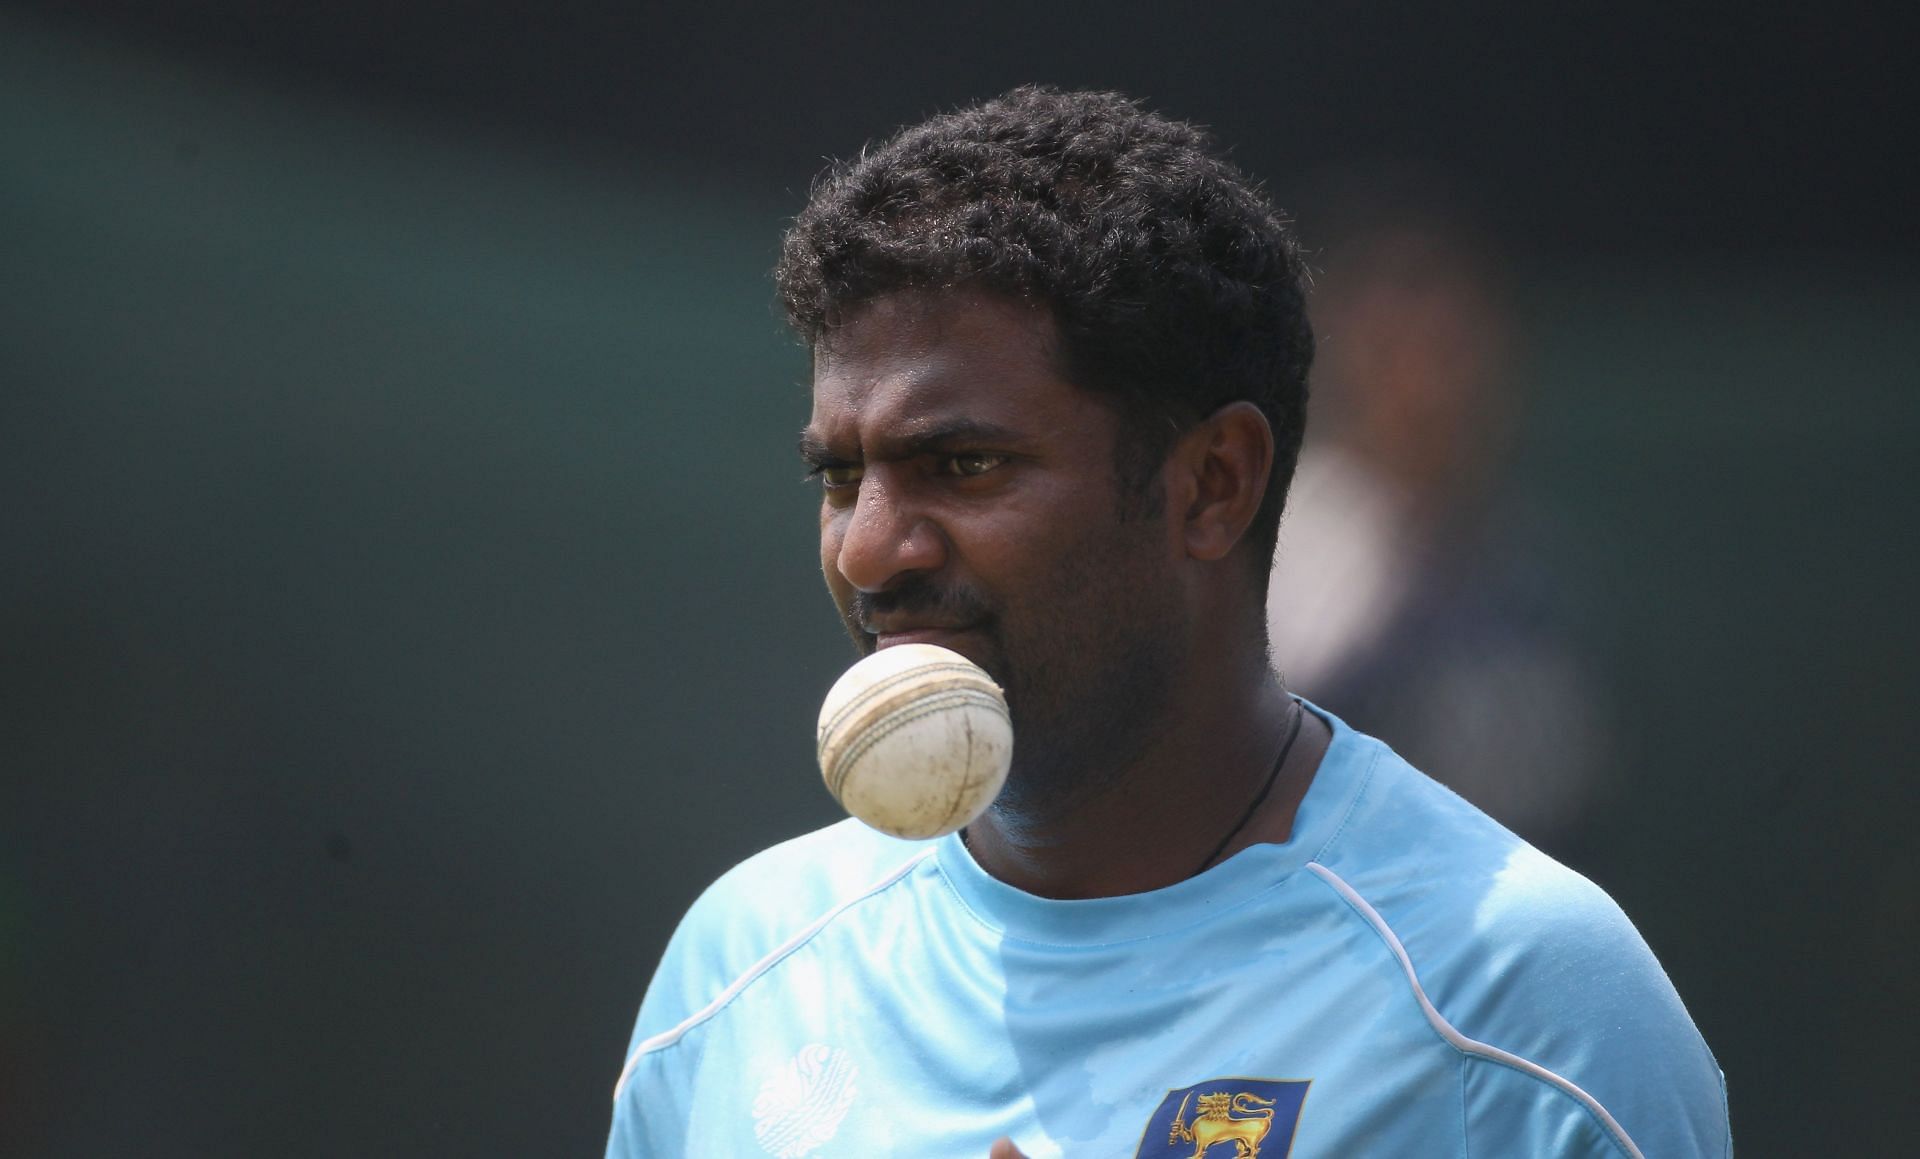 Muttiah Muralitharan was at his frugal best in the IPL